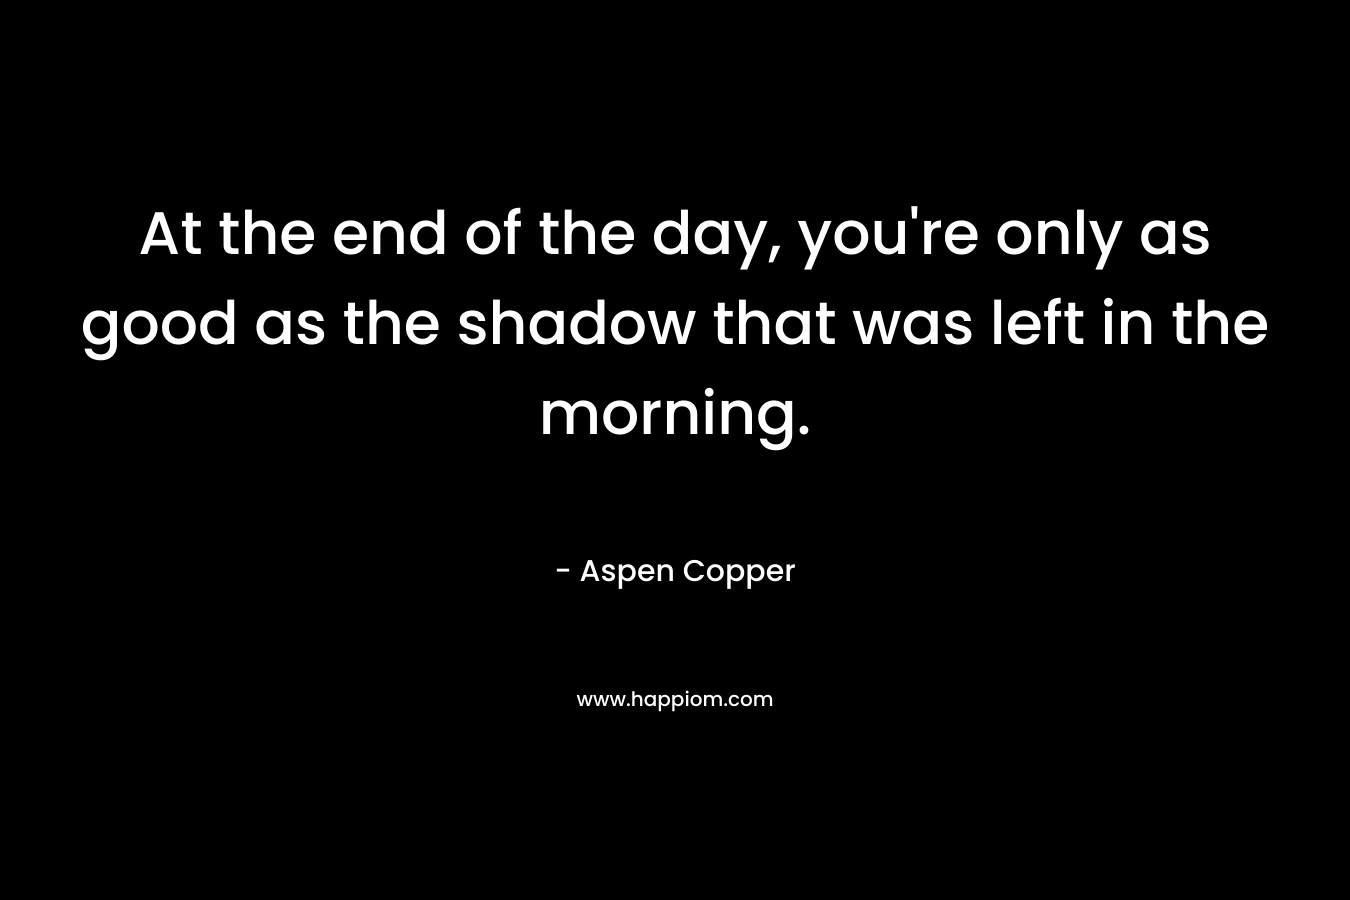 At the end of the day, you're only as good as the shadow that was left in the morning.